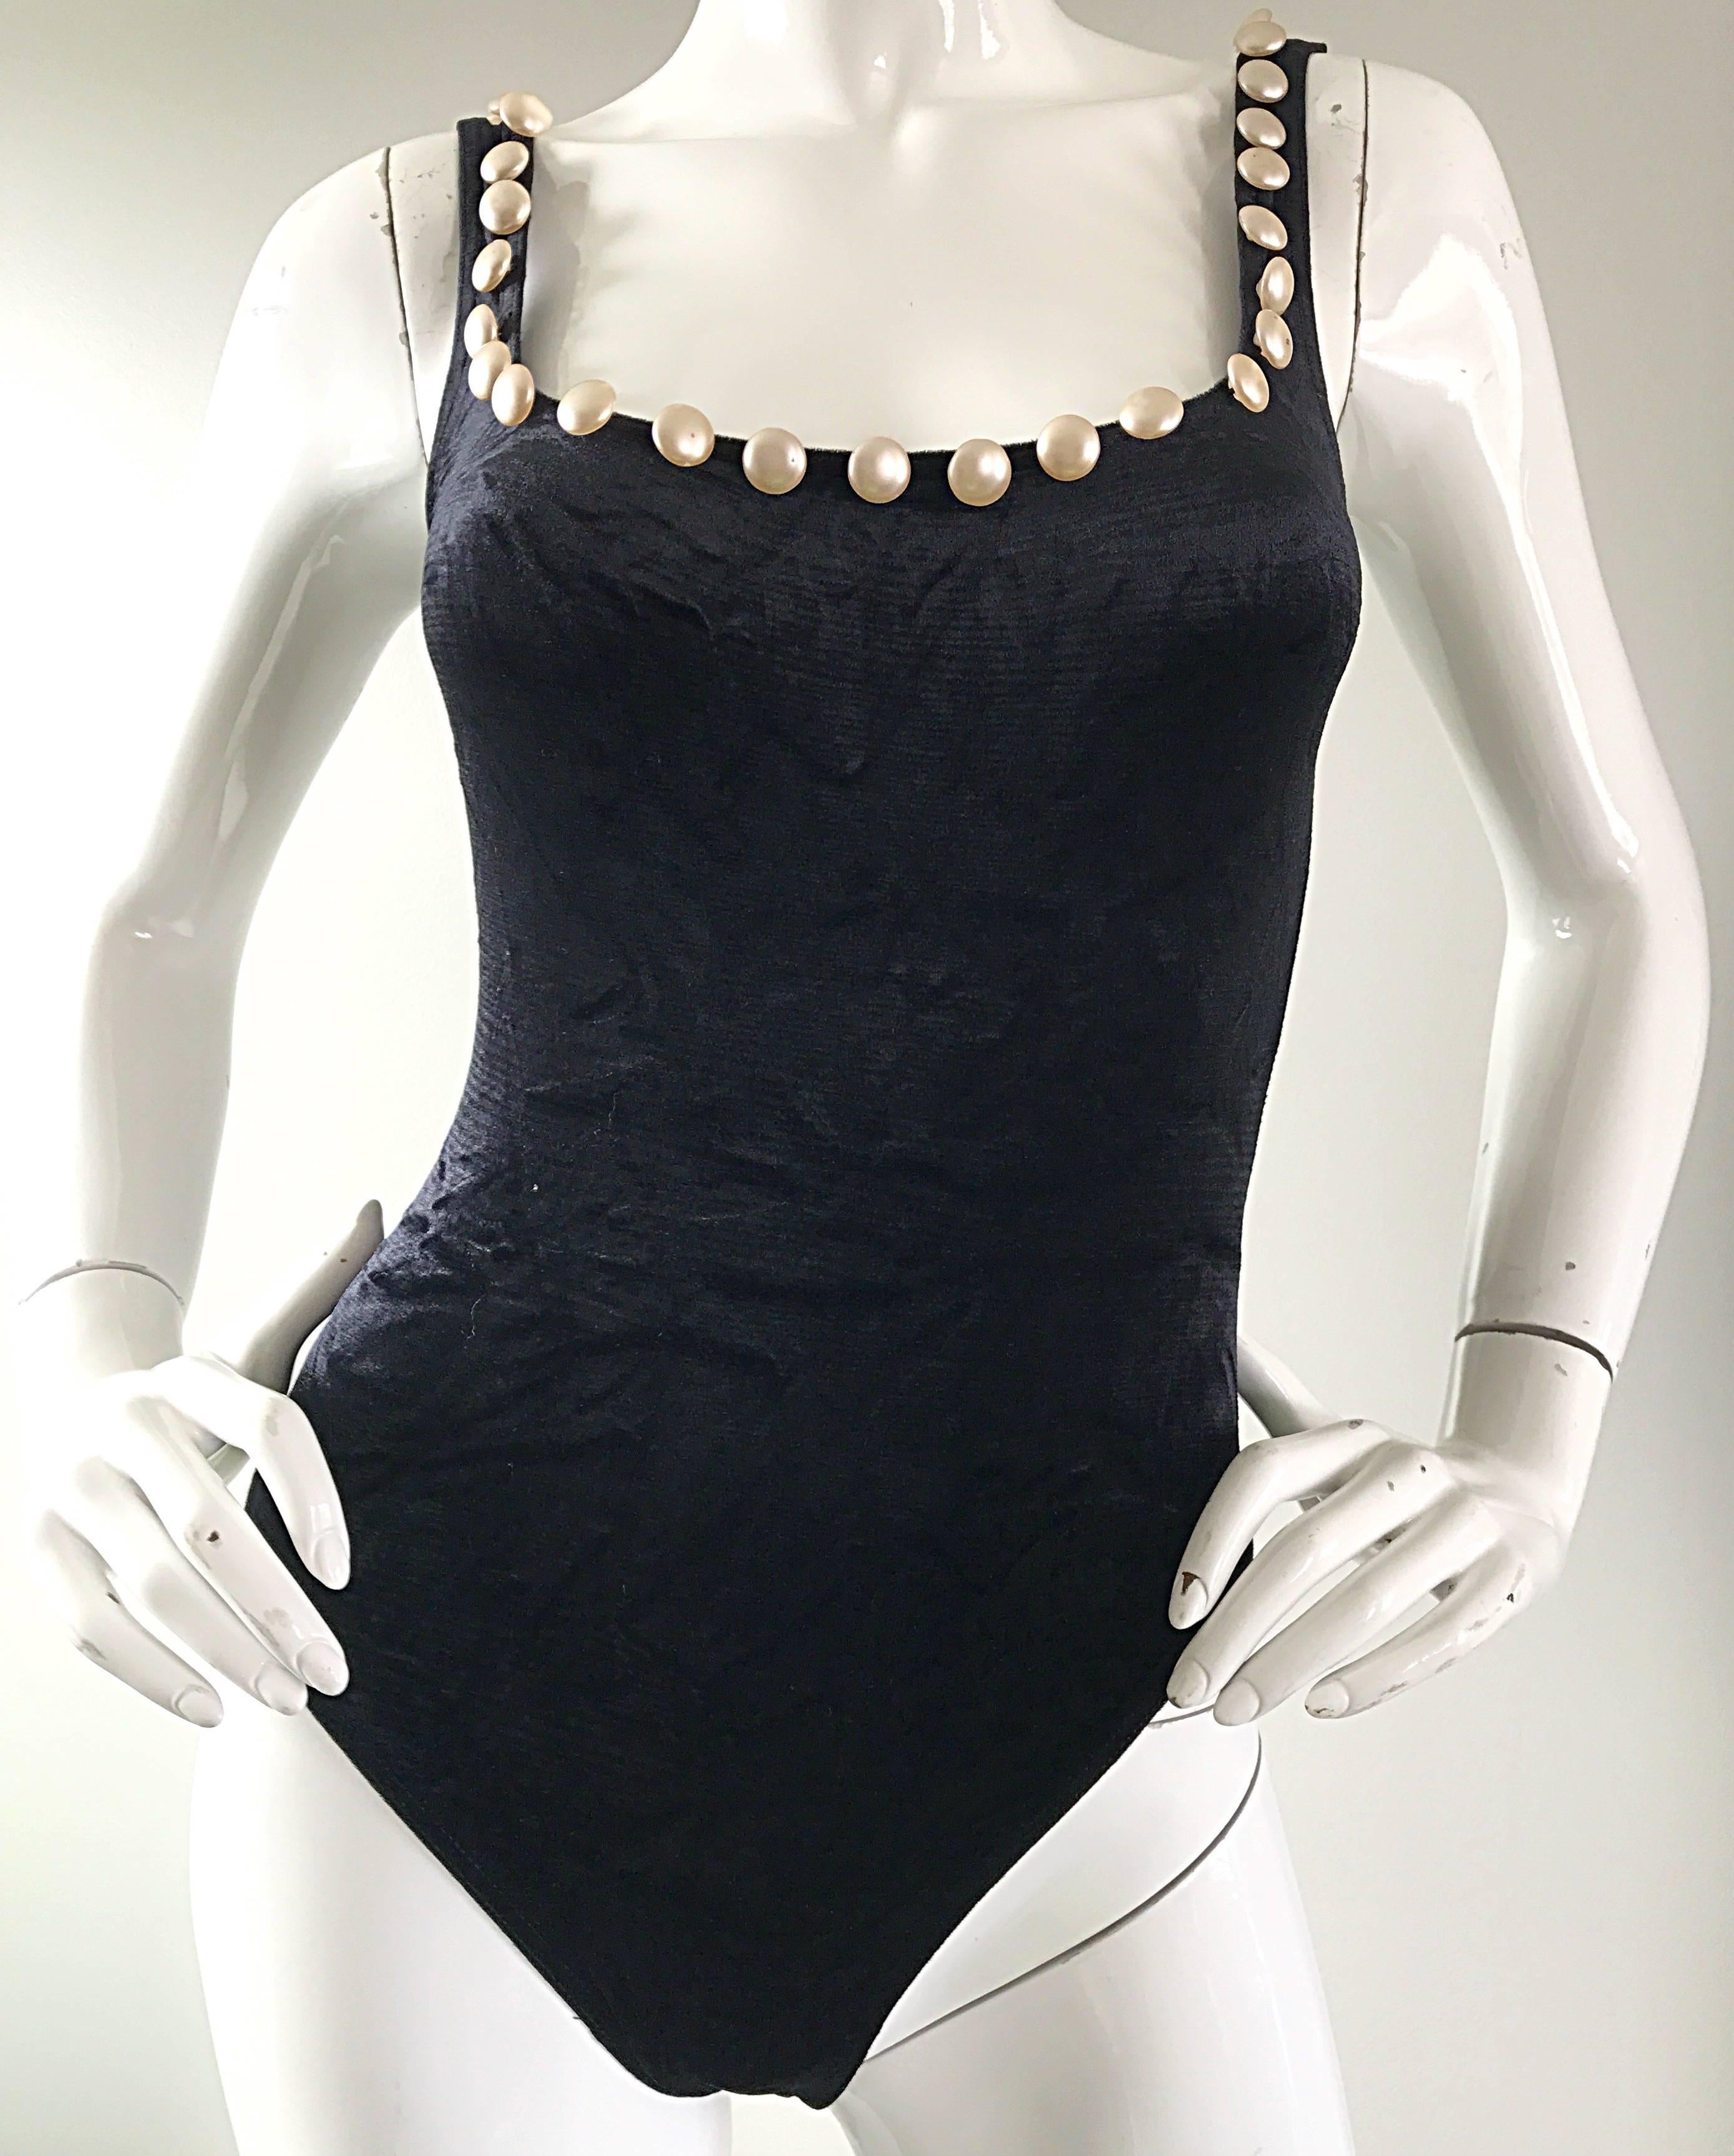 Vintage Moschino 1990s Black and White Velour Pearl Encrusted Bodysuit Swimsuit For Sale 2